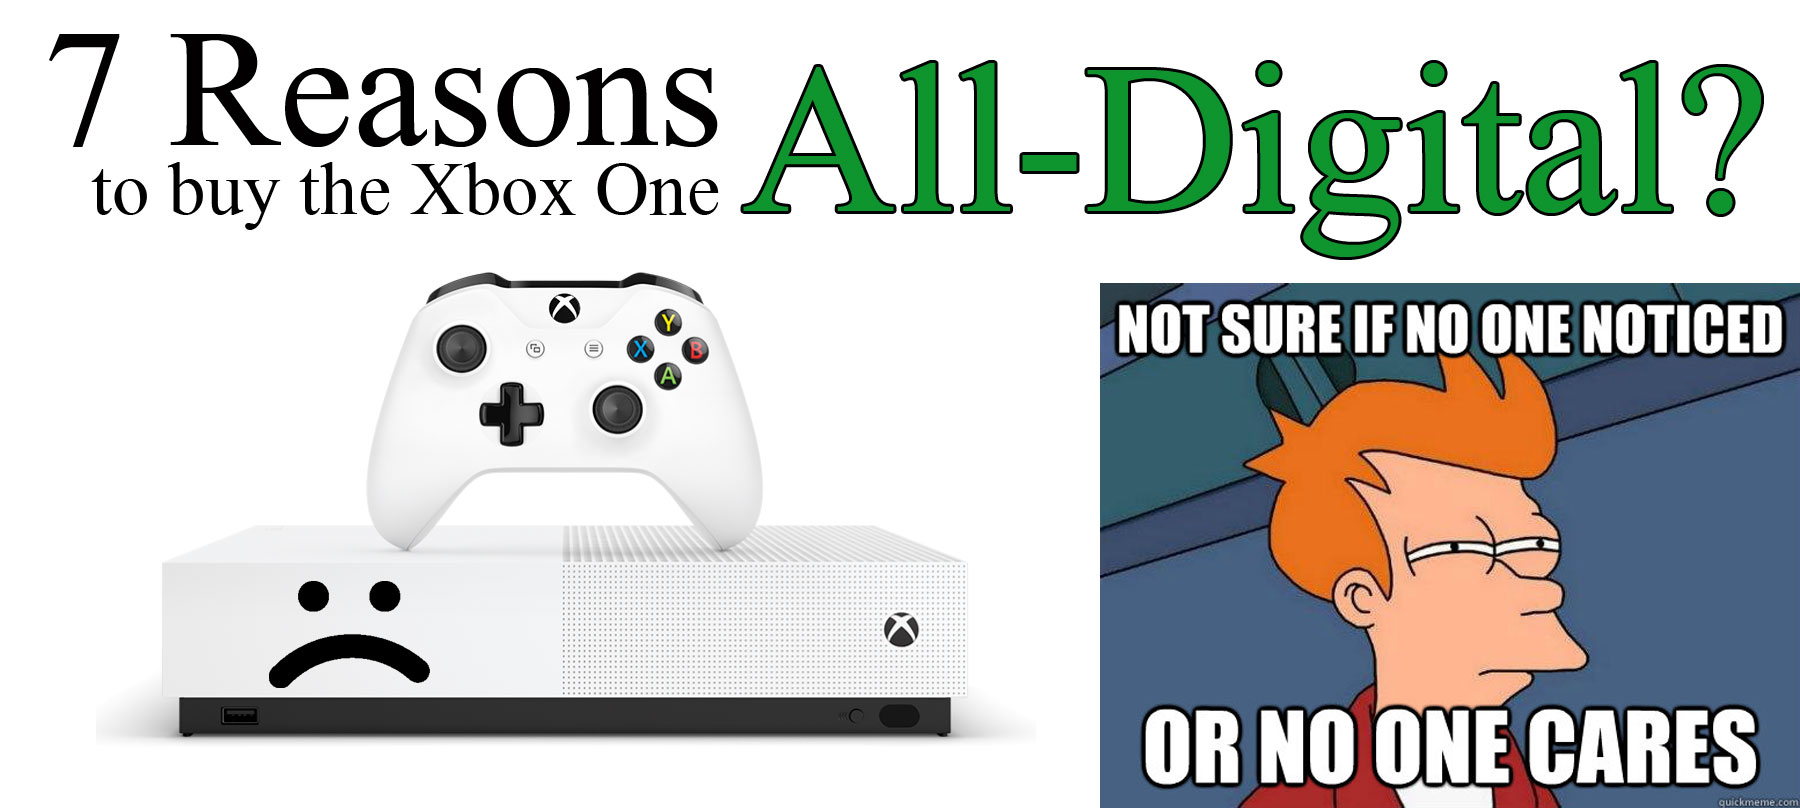 5 reasons why you should buy the Xbox One S All-Digital